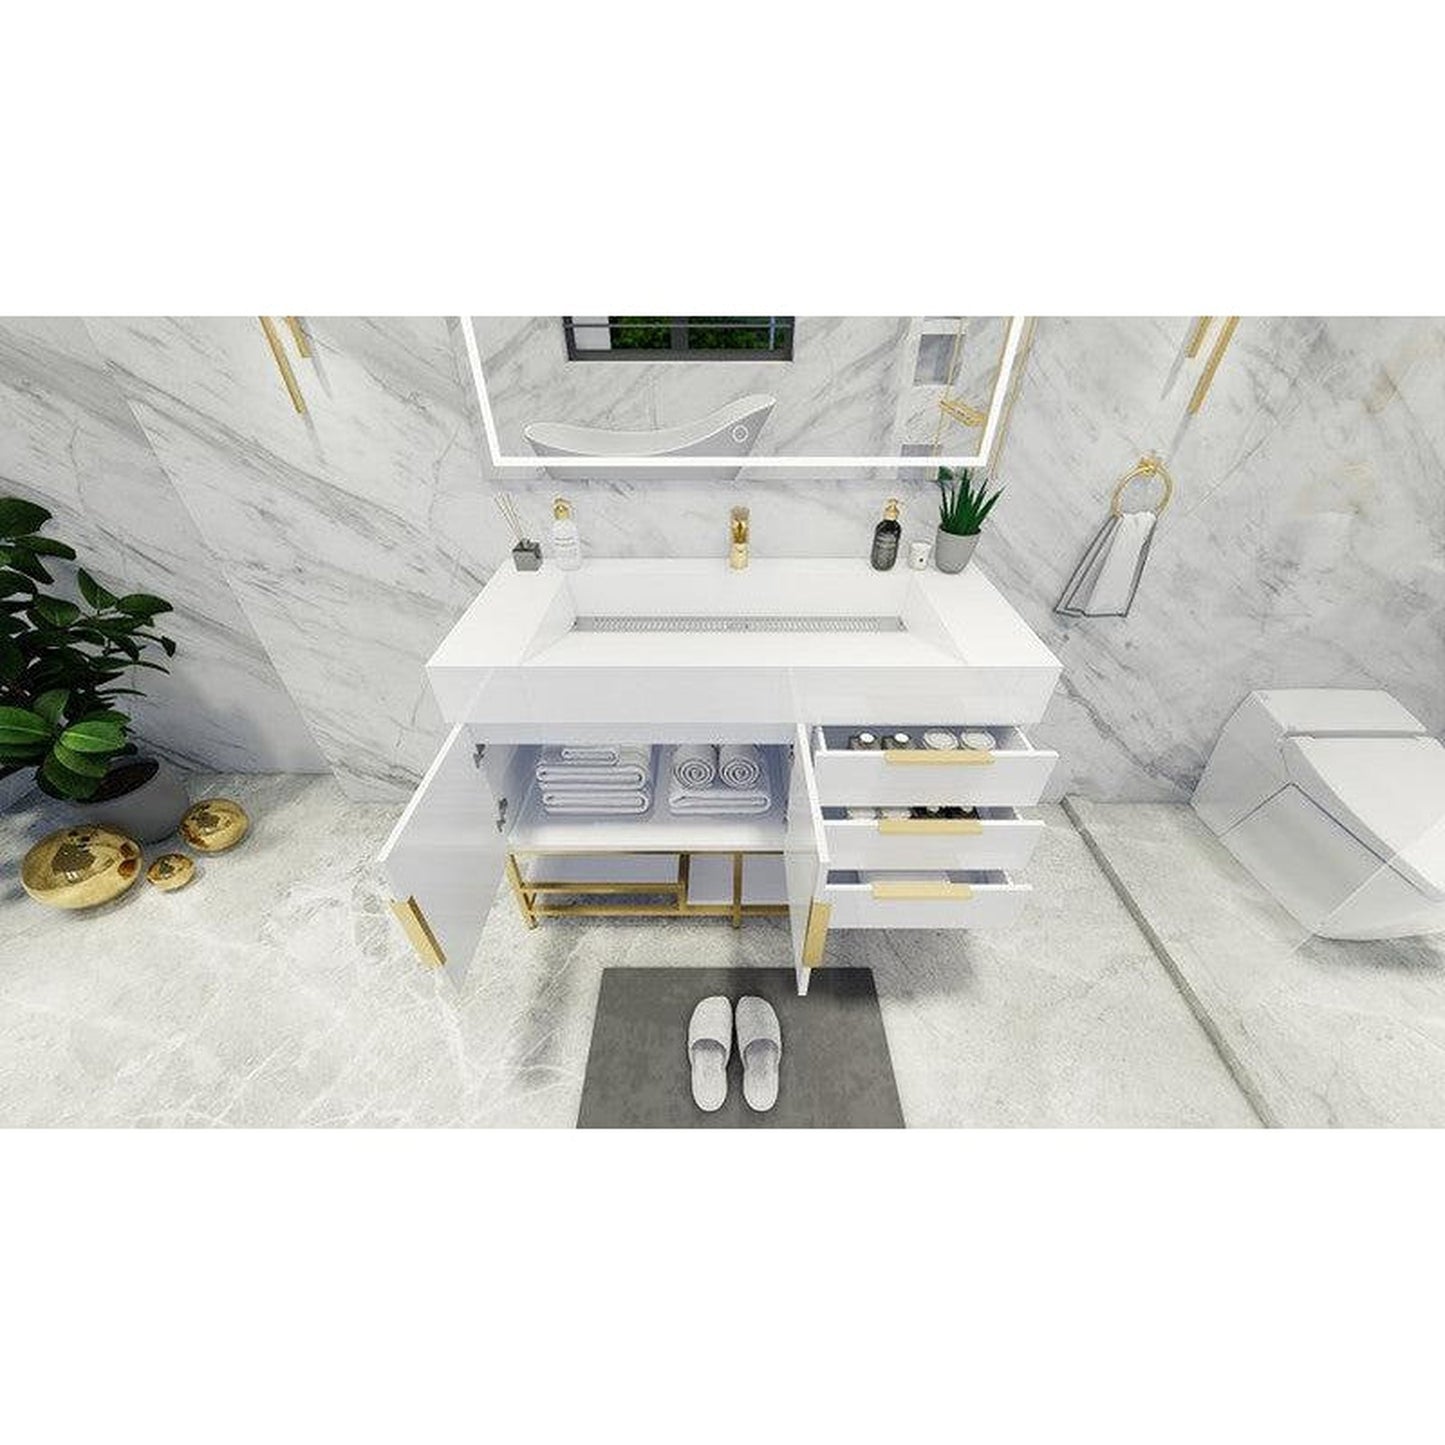 Moreno Bath Bethany 48" High Gloss White Freestanding Vanity With Single Reinforced White Acrylic Sink